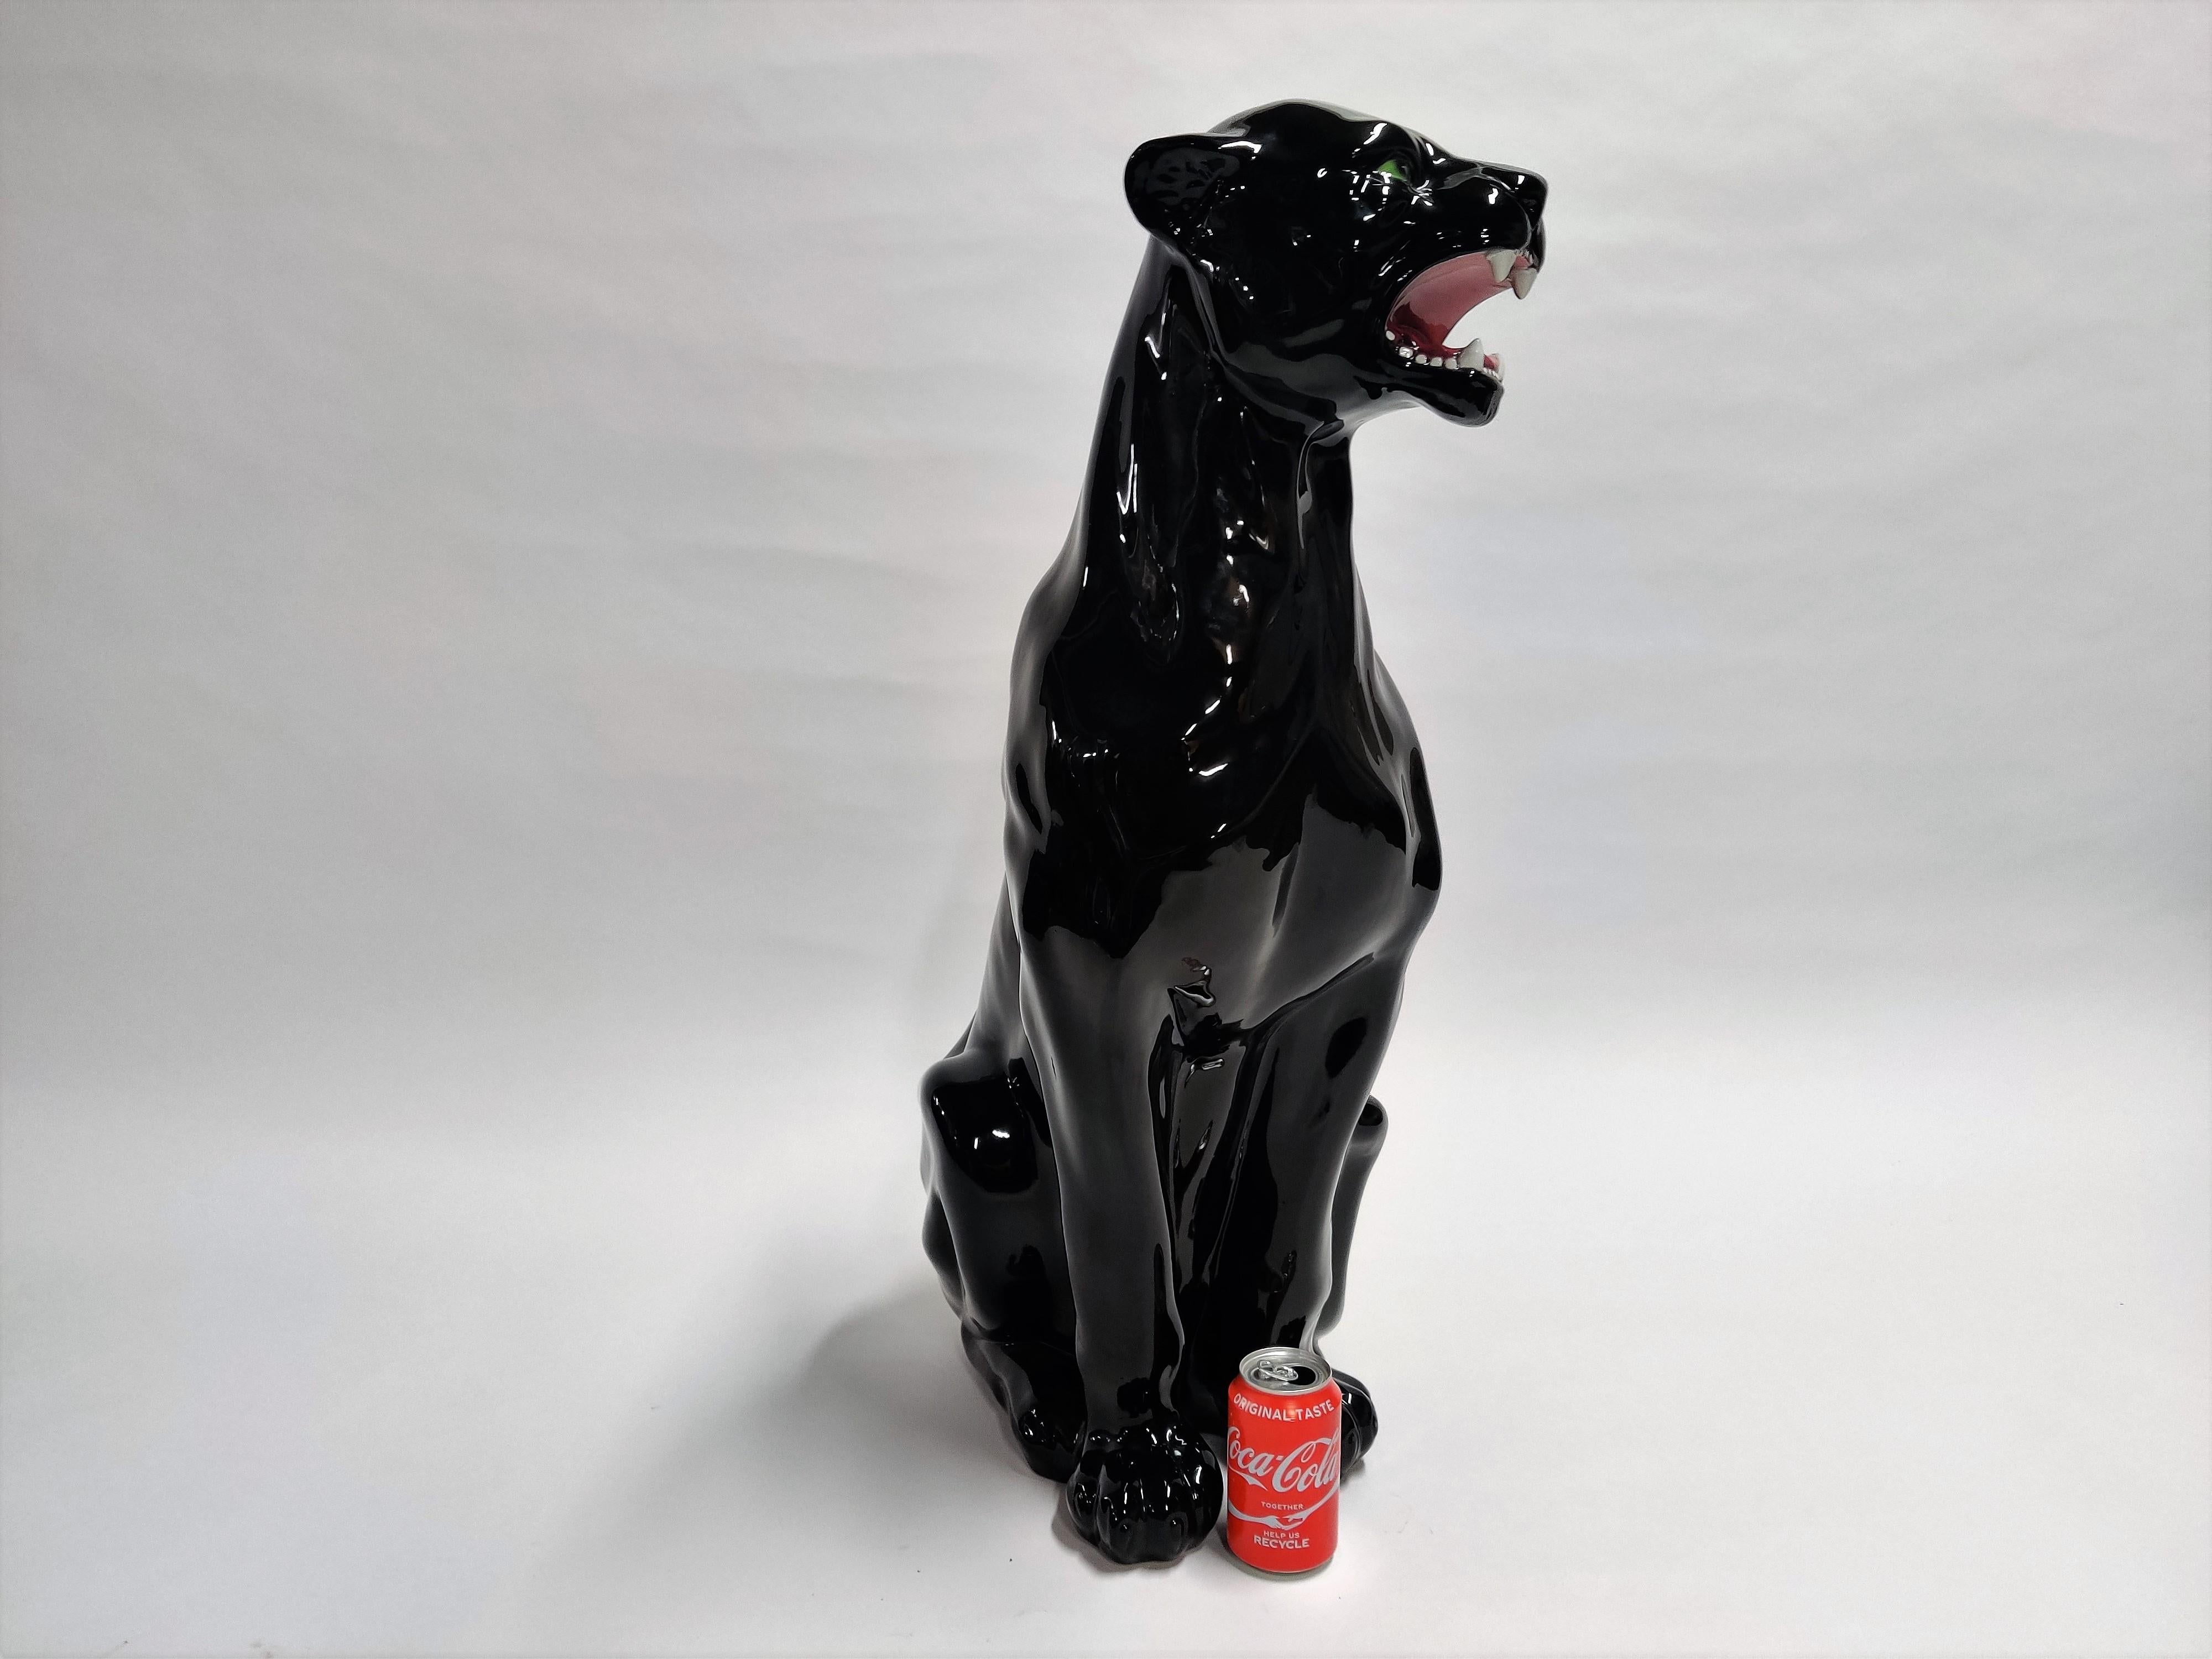 A large Italian vintage sculptural panther, produced circa 1970s, made from glazed ceramic, depicted sitting upright,

Labeled 'made in italy'

Very good condition, no chips

Measures: Height 83cm/32.67